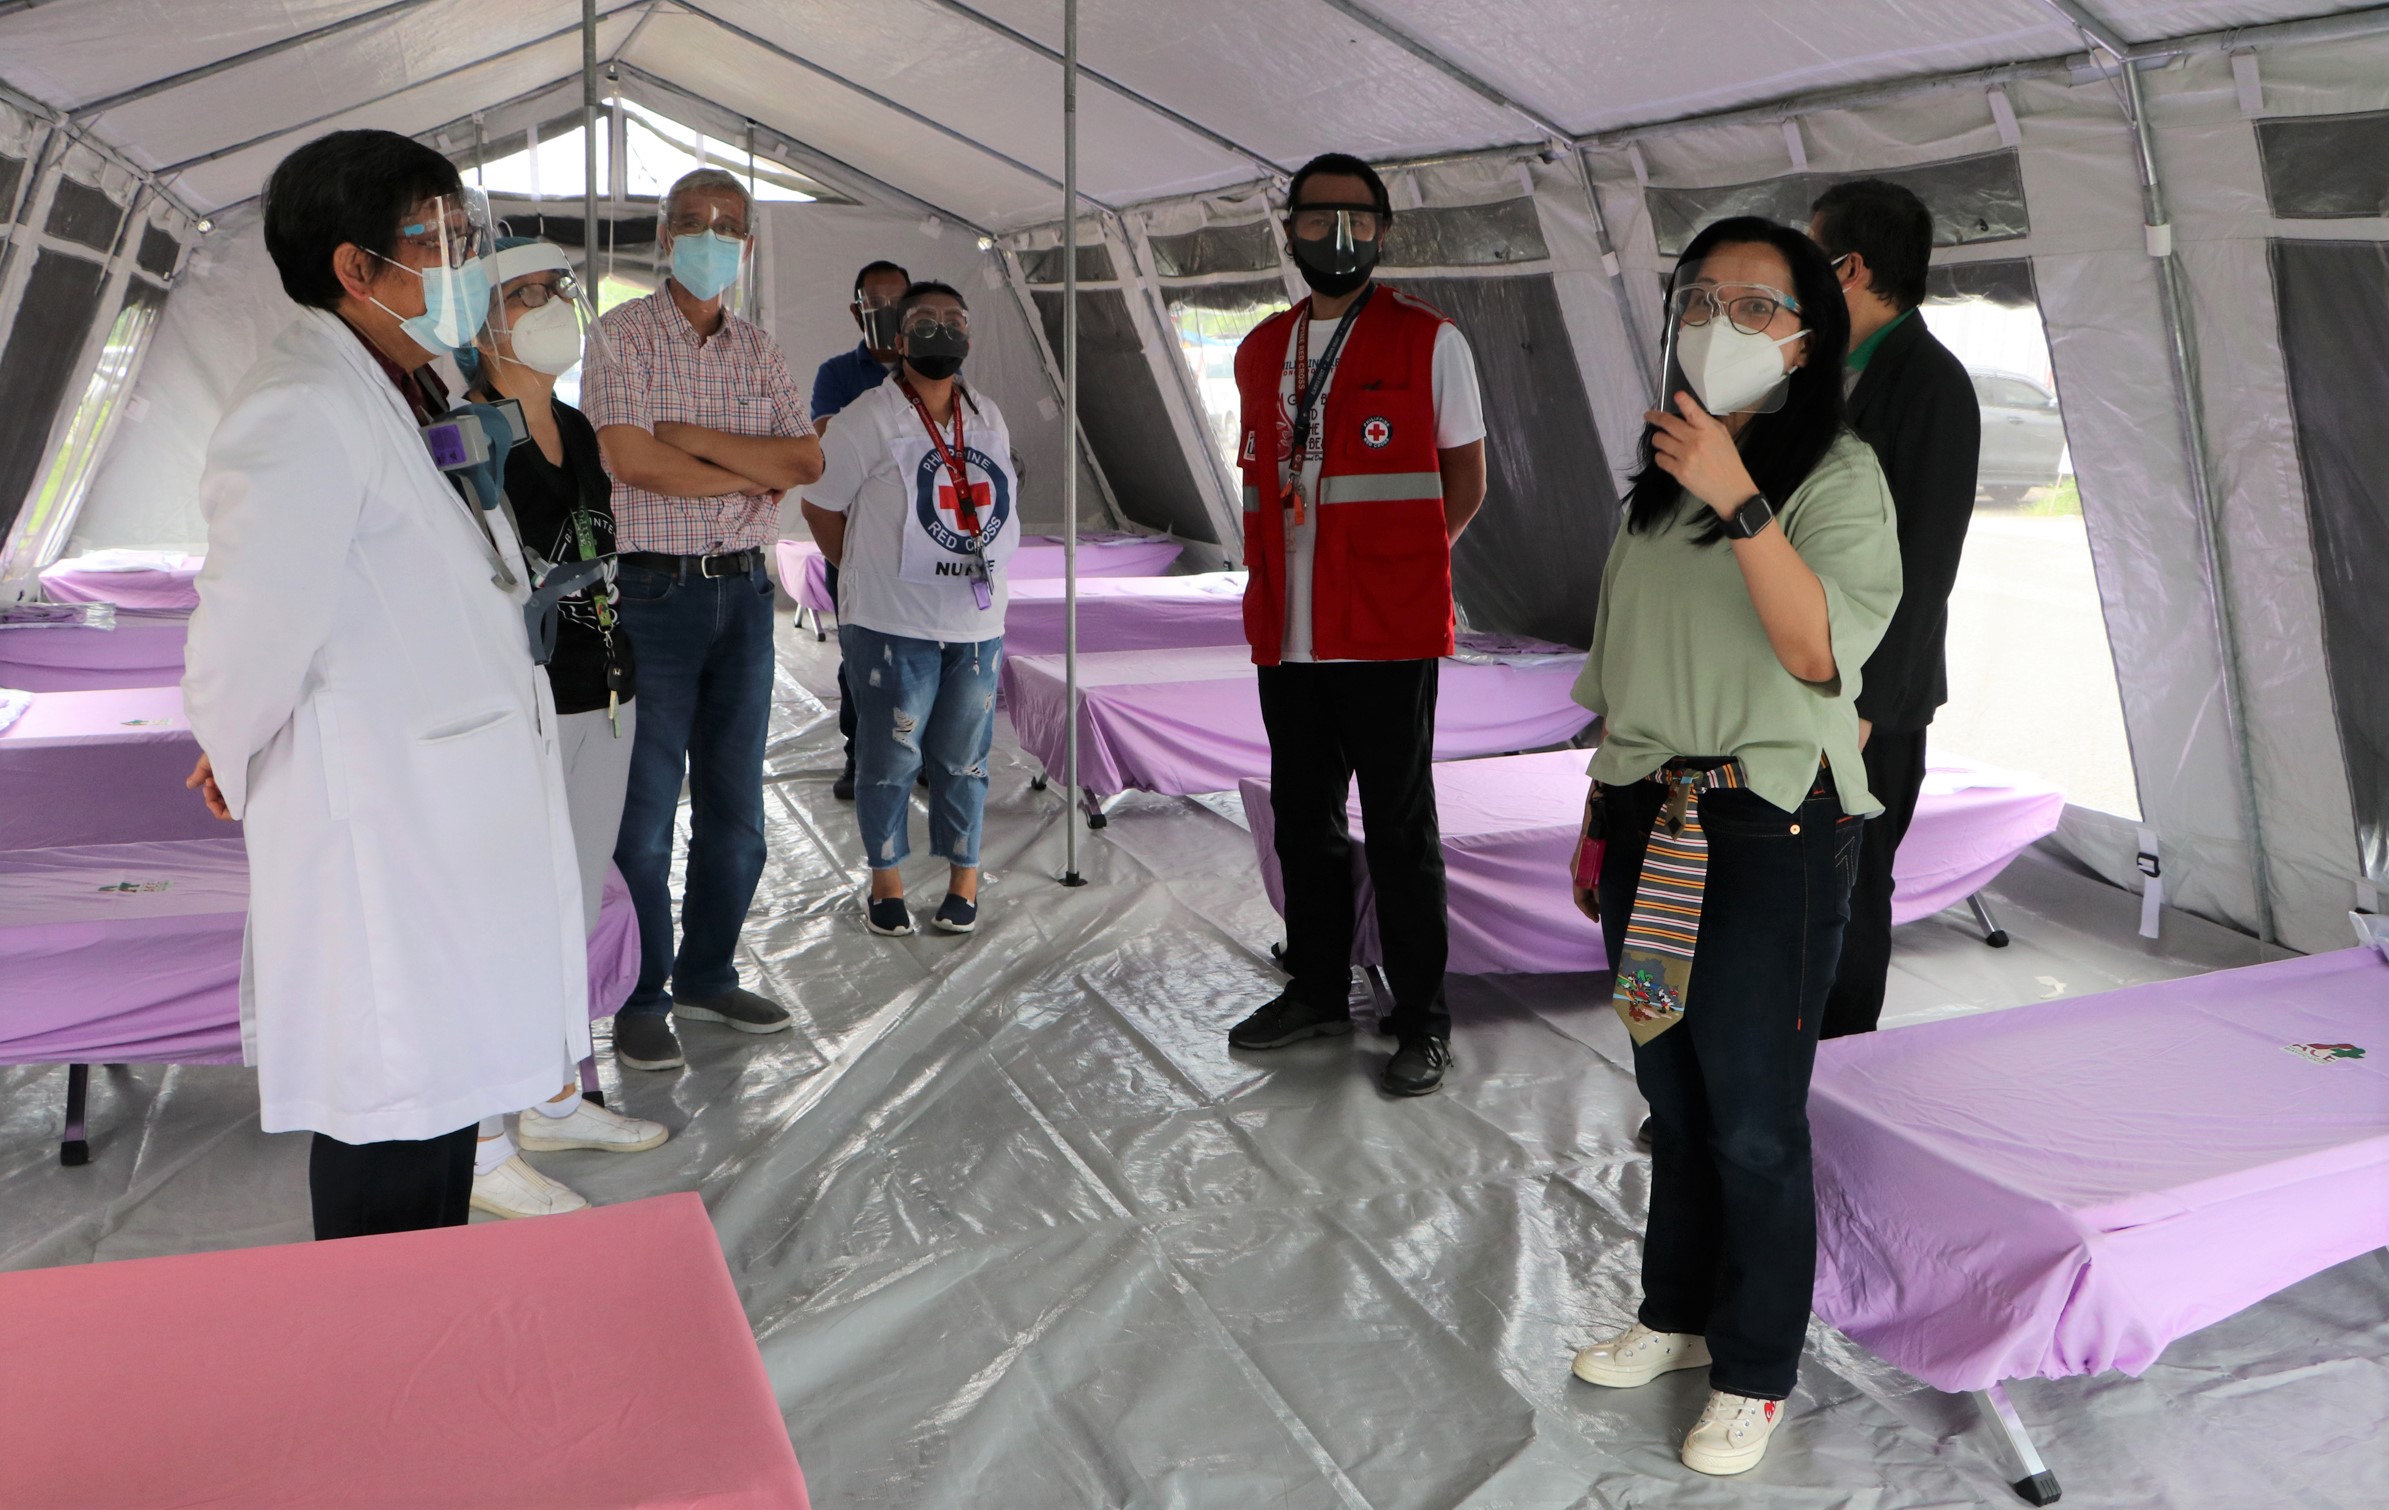 SBMA Chairman and Administrator Wilma T. Eisma inspects the Covid-19 medical tent, along with local infectious diseases expert Dr. Erlinda Alconga and other Baypointe Hospital officials